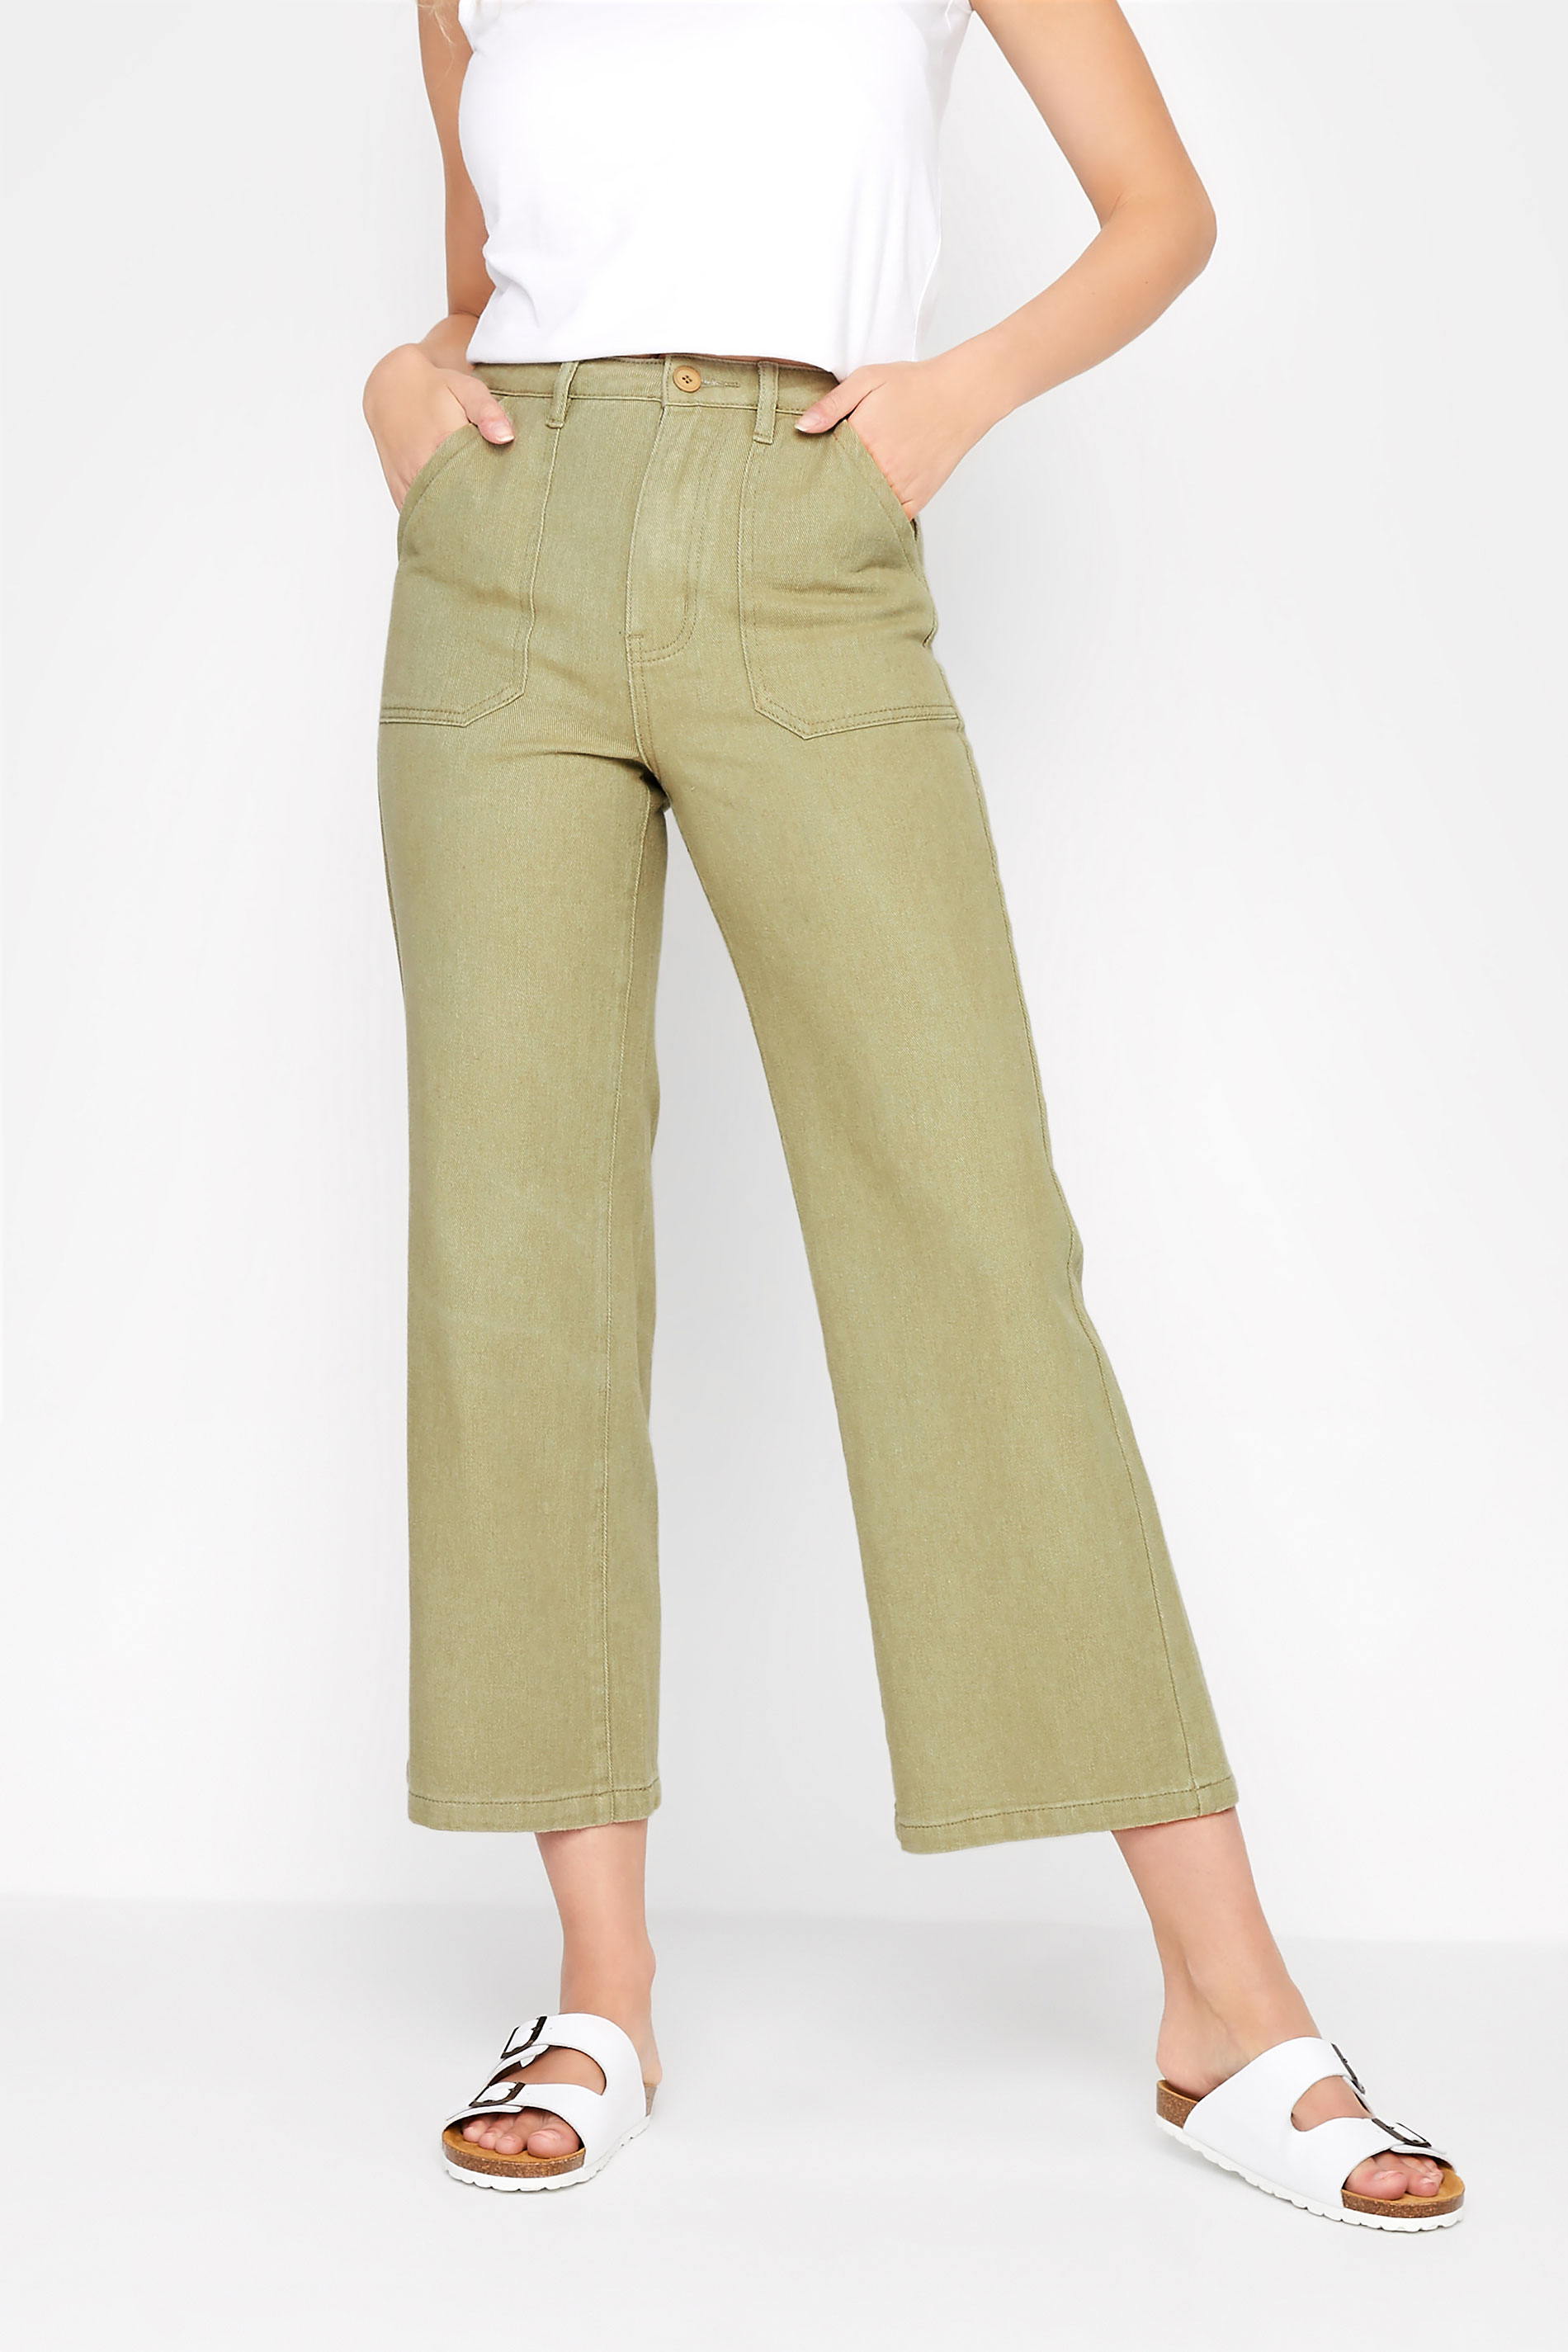 Maison Margiela High-Waisted Wool-blend Cropped Trousers with Stitches  women - Glamood Outlet